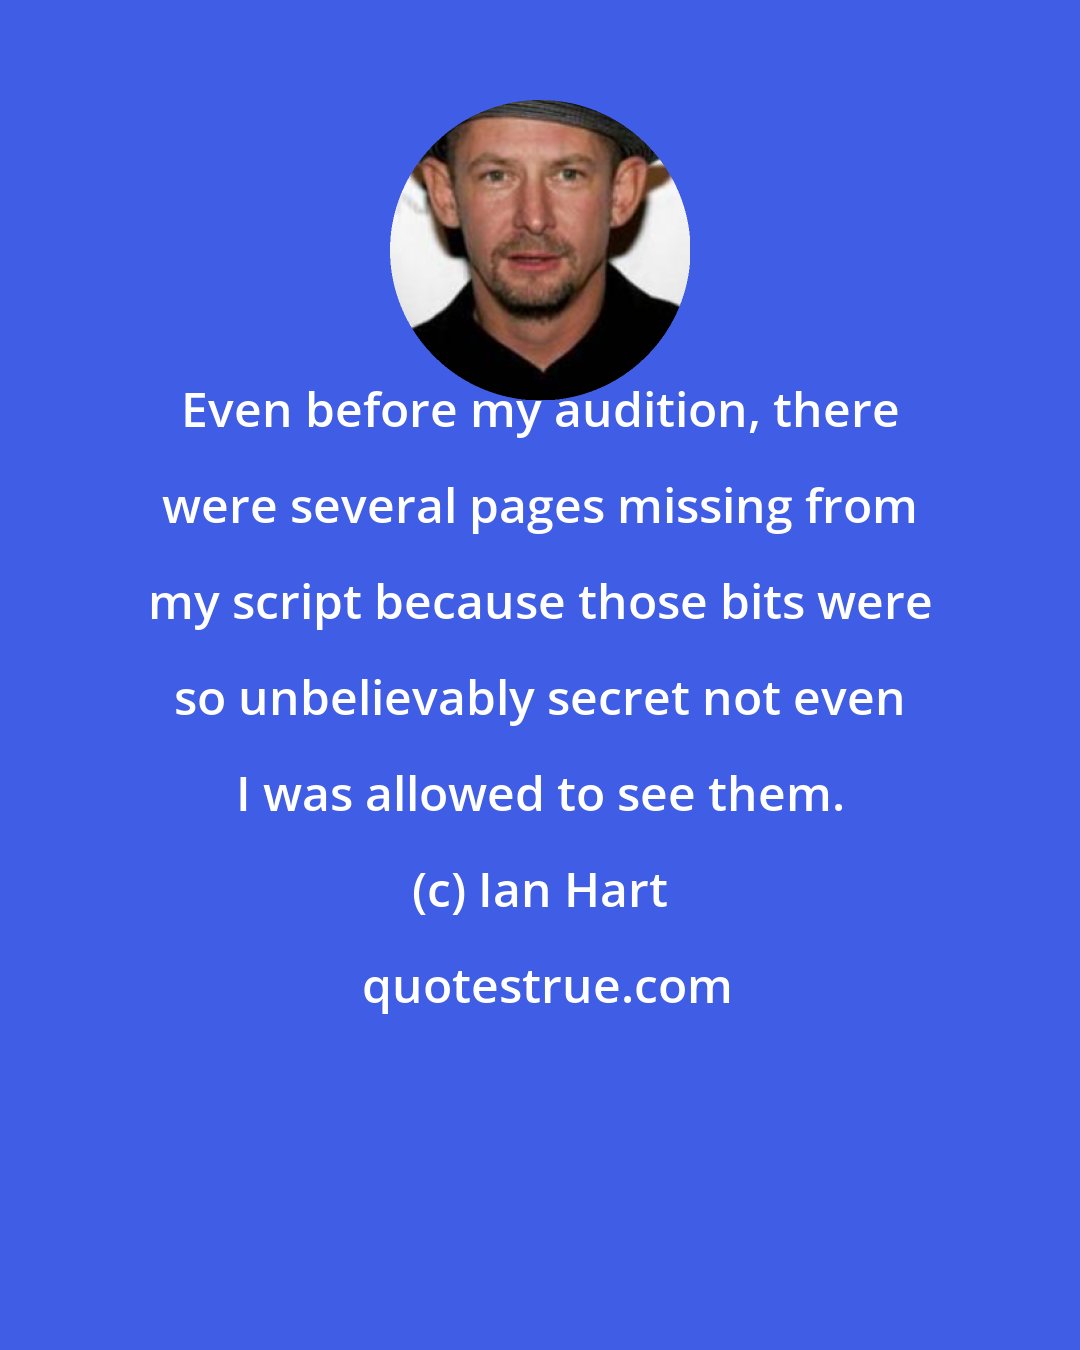 Ian Hart: Even before my audition, there were several pages missing from my script because those bits were so unbelievably secret not even I was allowed to see them.